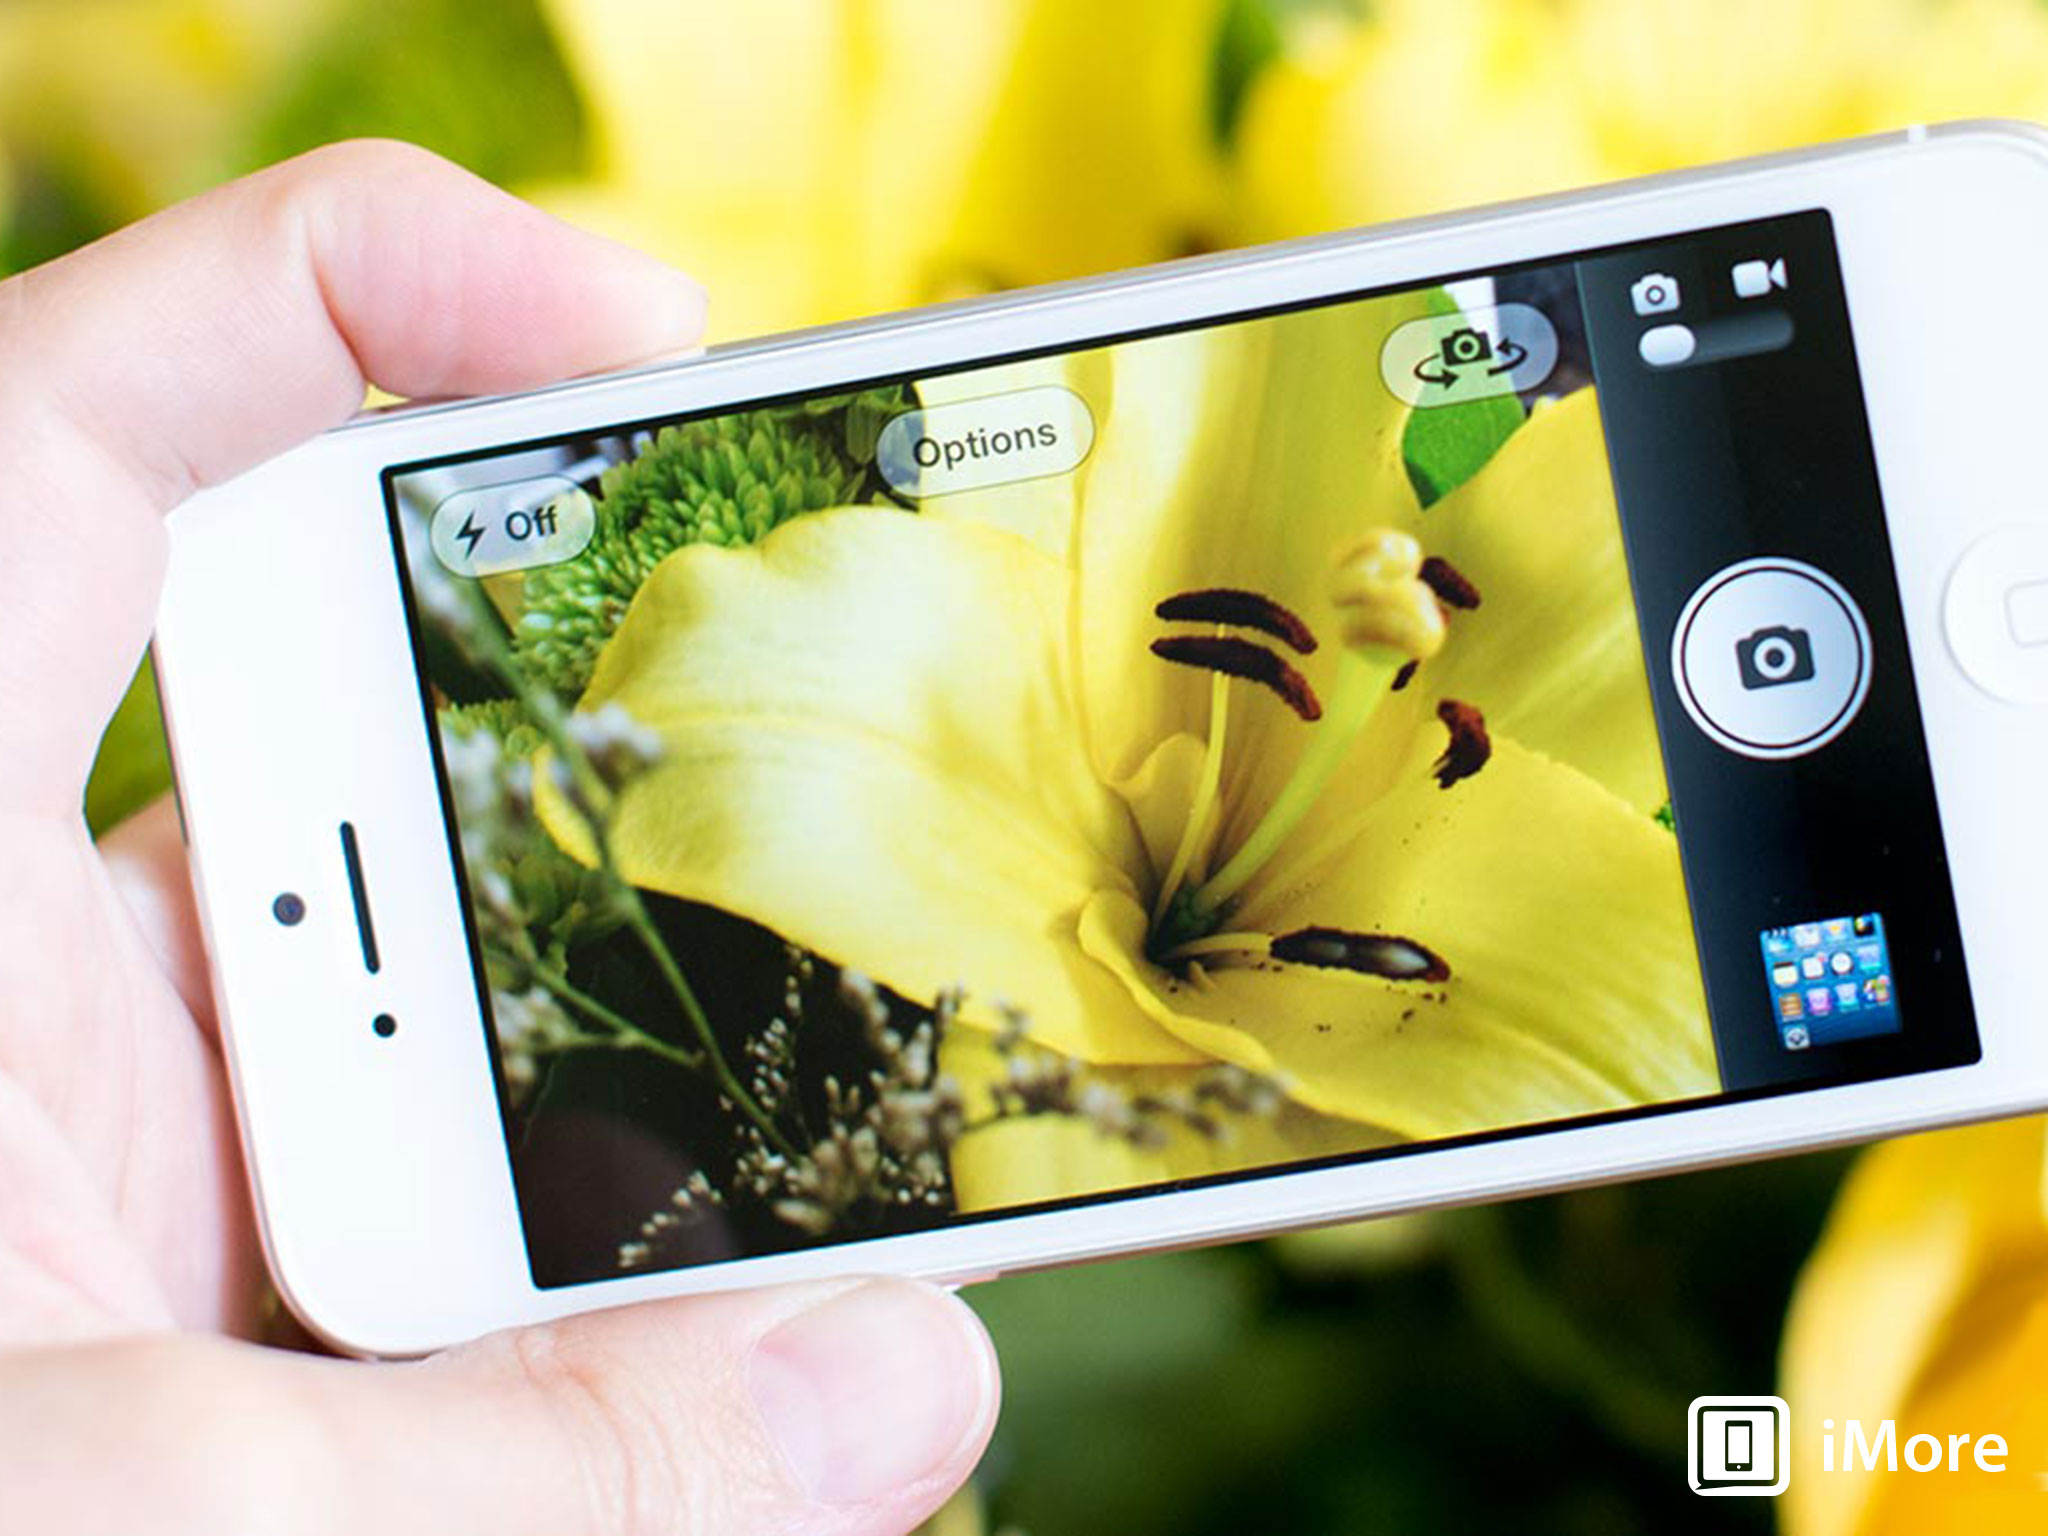 Shooting and editing photos with the iPhone 5 and Photoshop Express